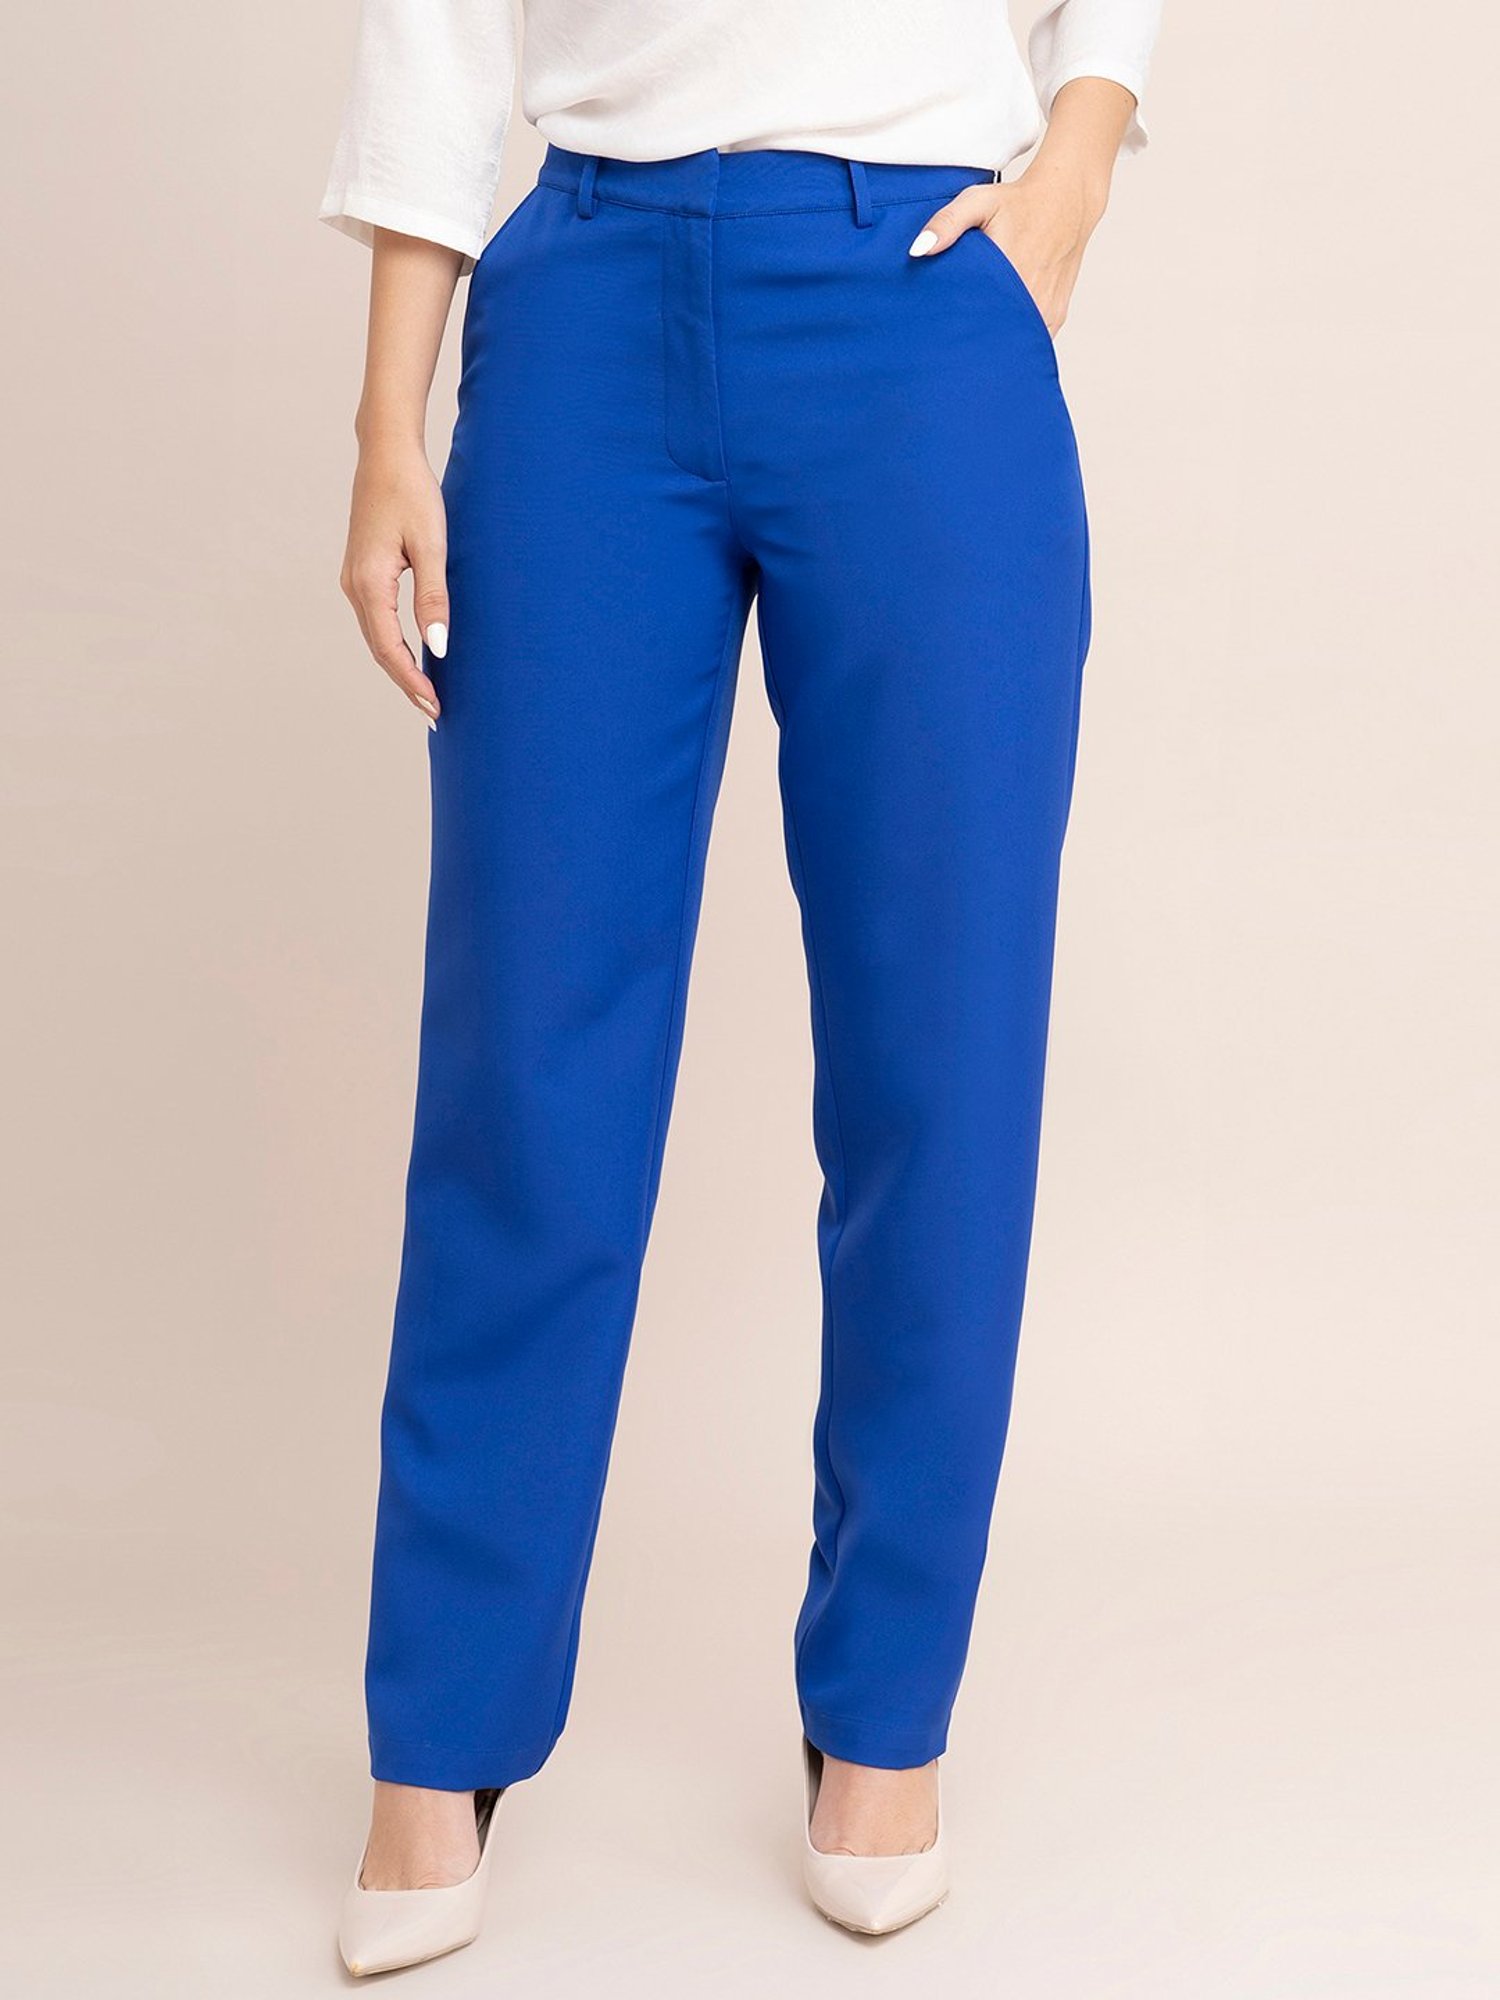 Busy Women's Royal Blue Trousers - Etsy